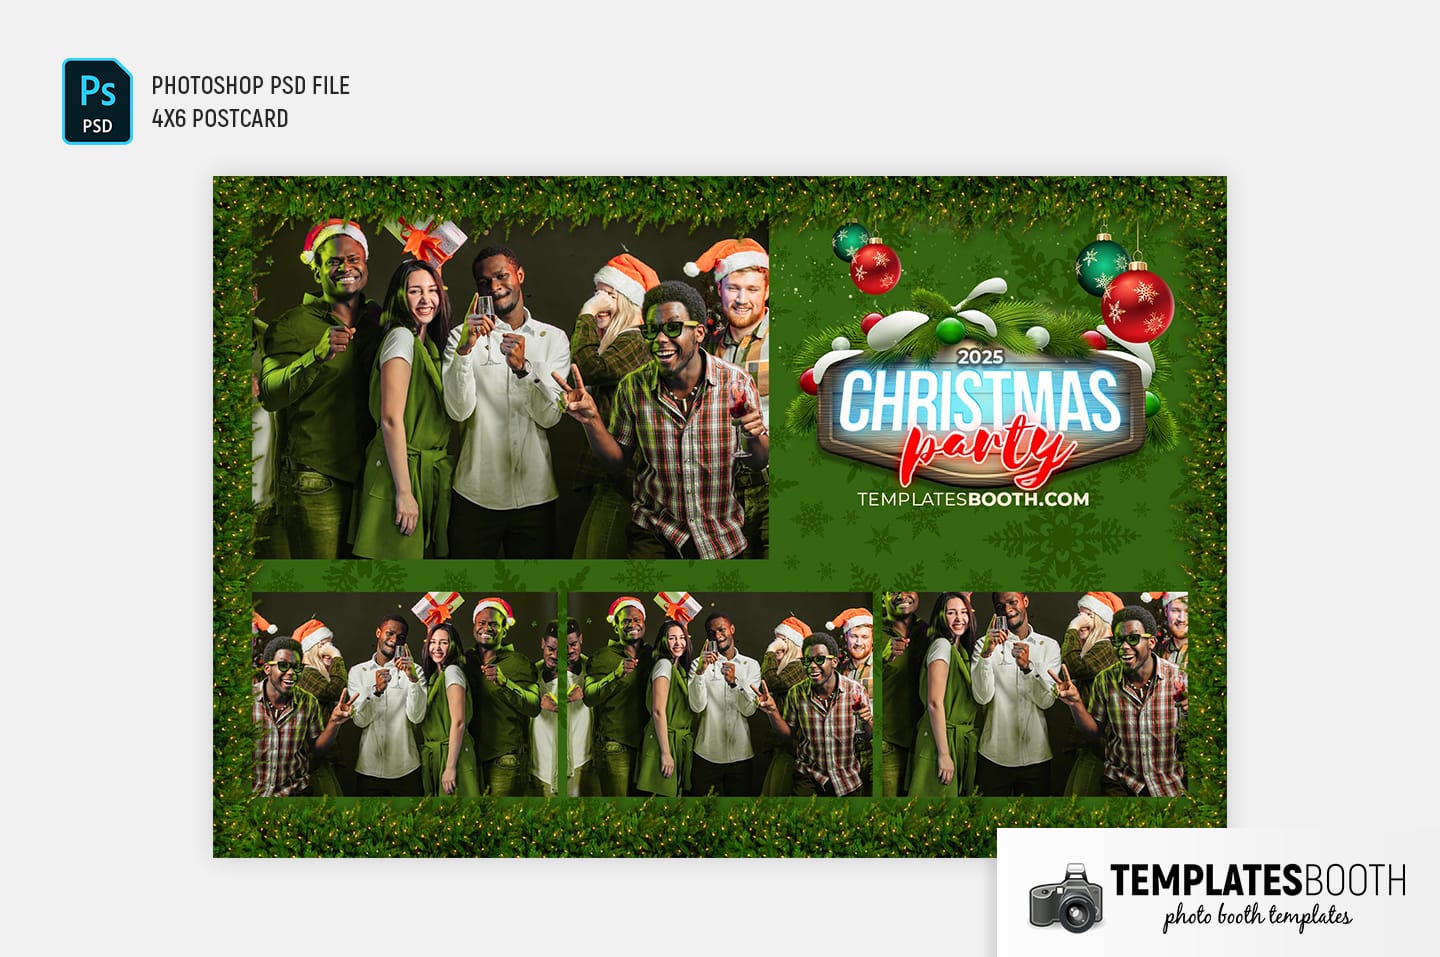 Green Christmas Photo Booth Template (4x6 postcard landscape)